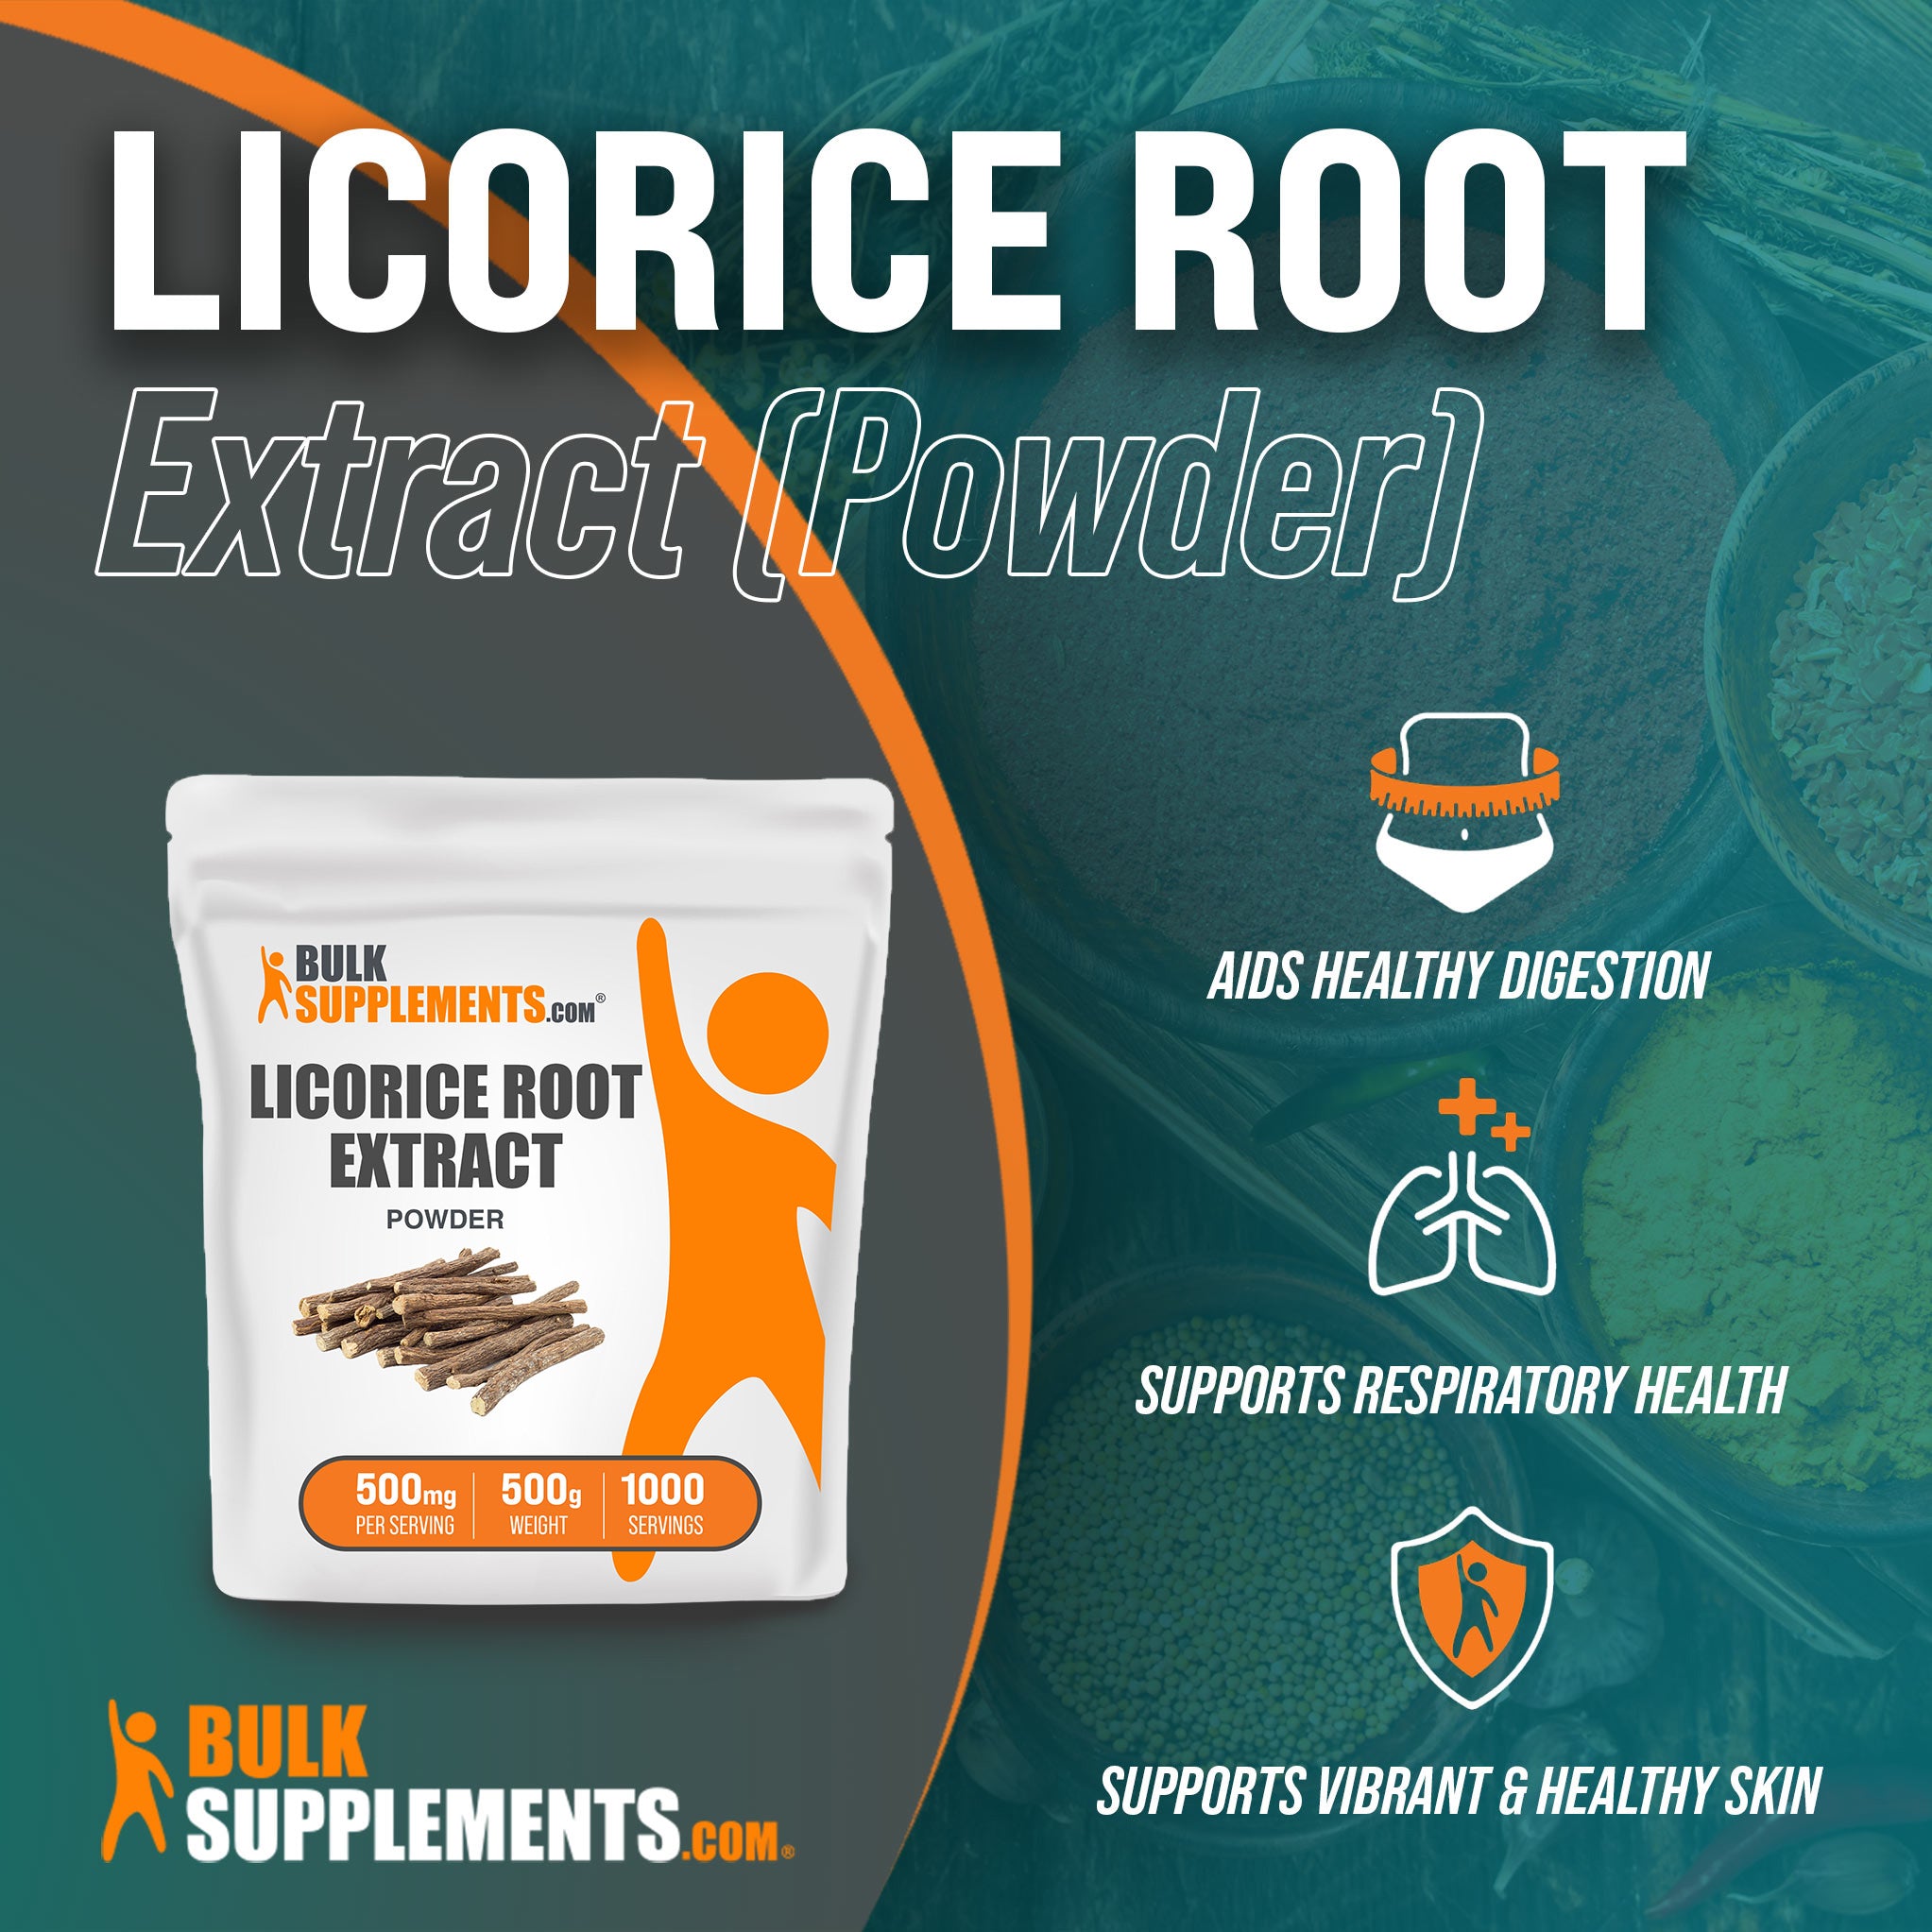 Benefits of Licorice Root Extract: aids healthy digestion, supports respiratory health, supports vibrant and healthy skin